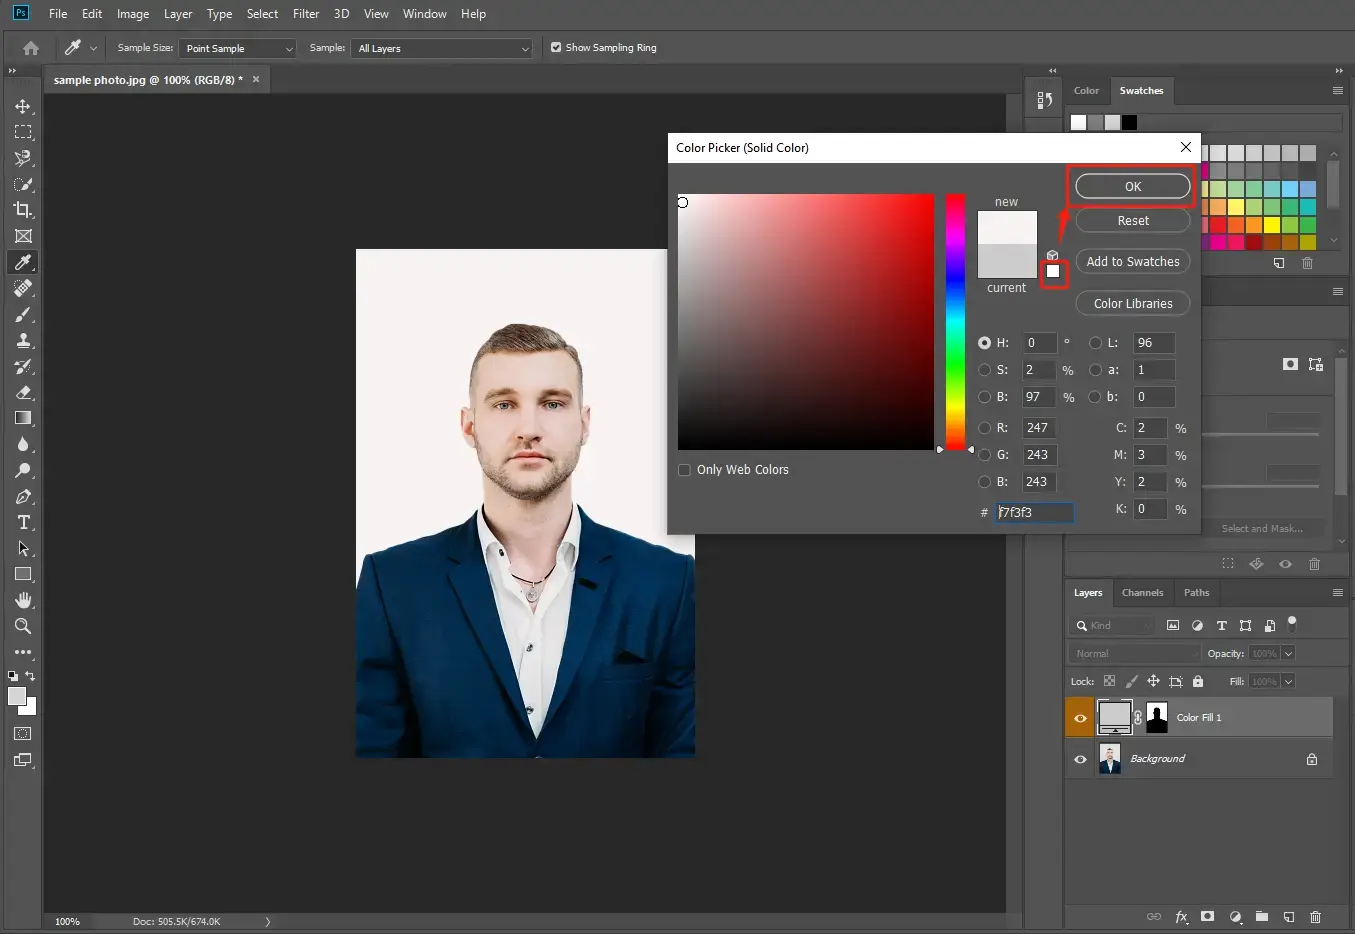 change background color in photoshop